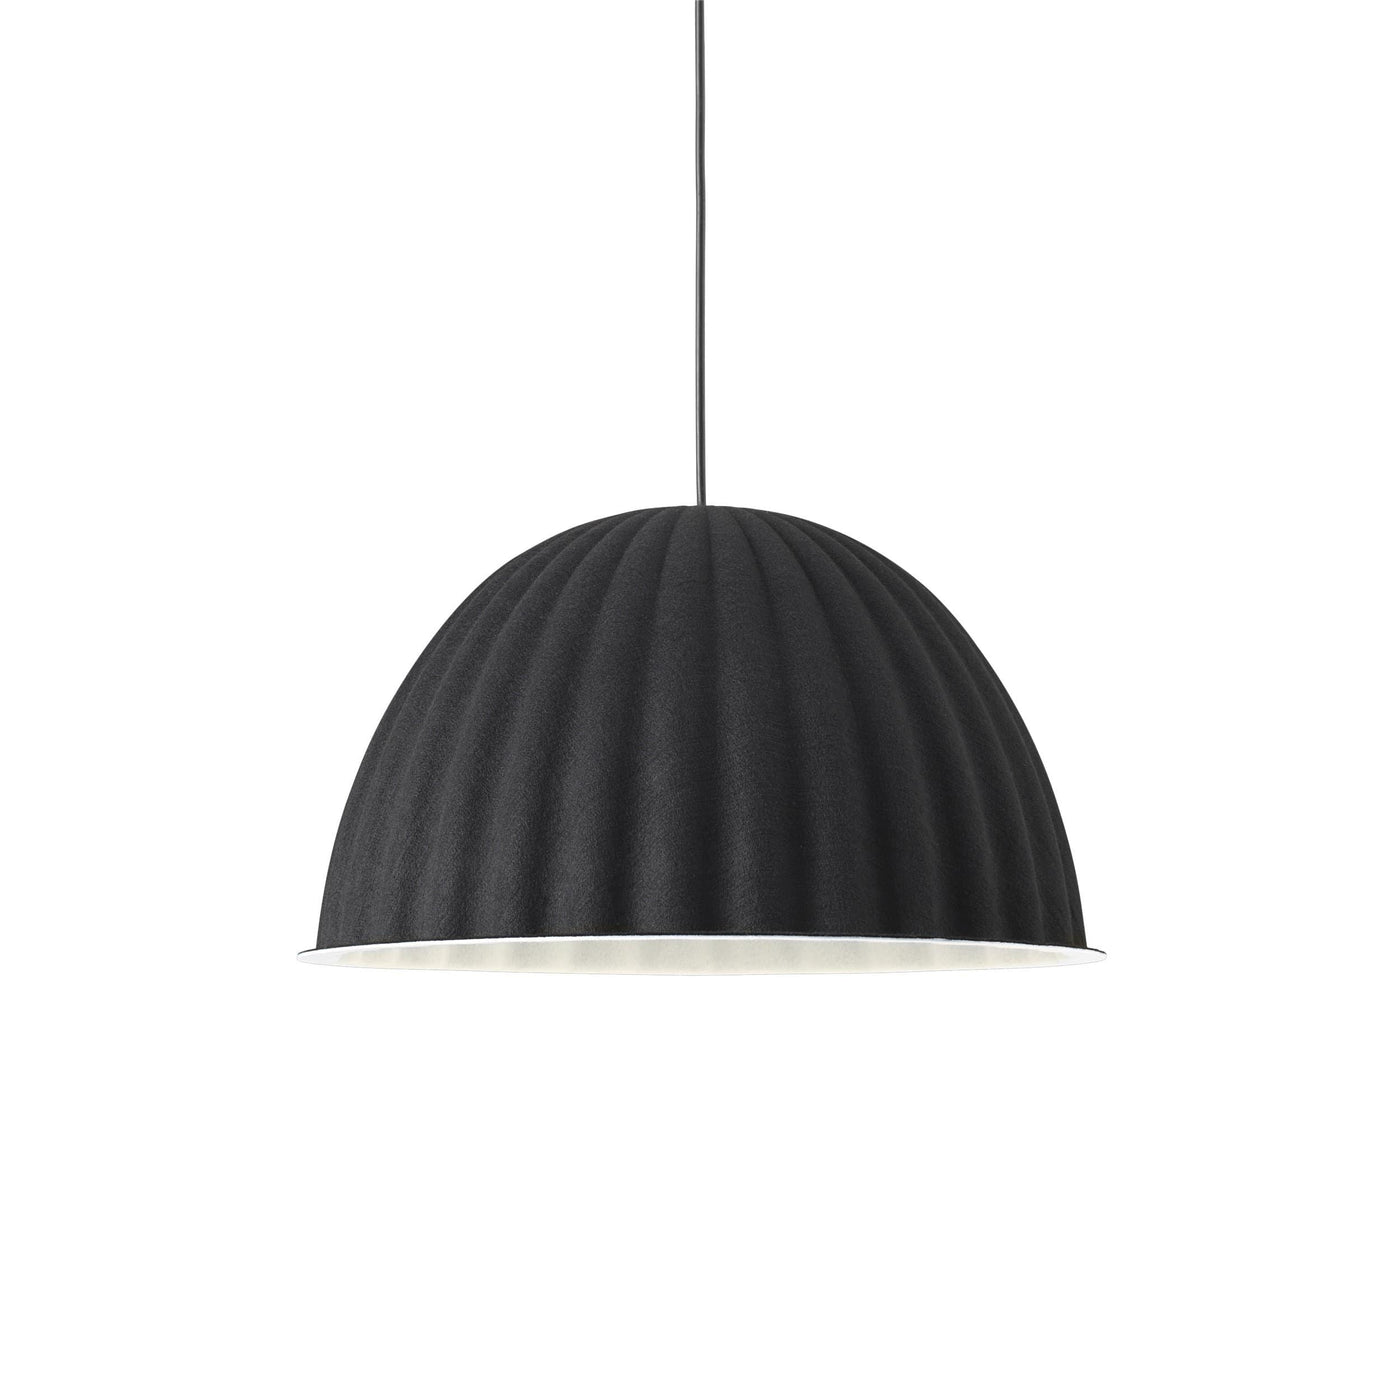 muuto under the bell pendant lamp grey small available at someday designs. #colour_grey-felt